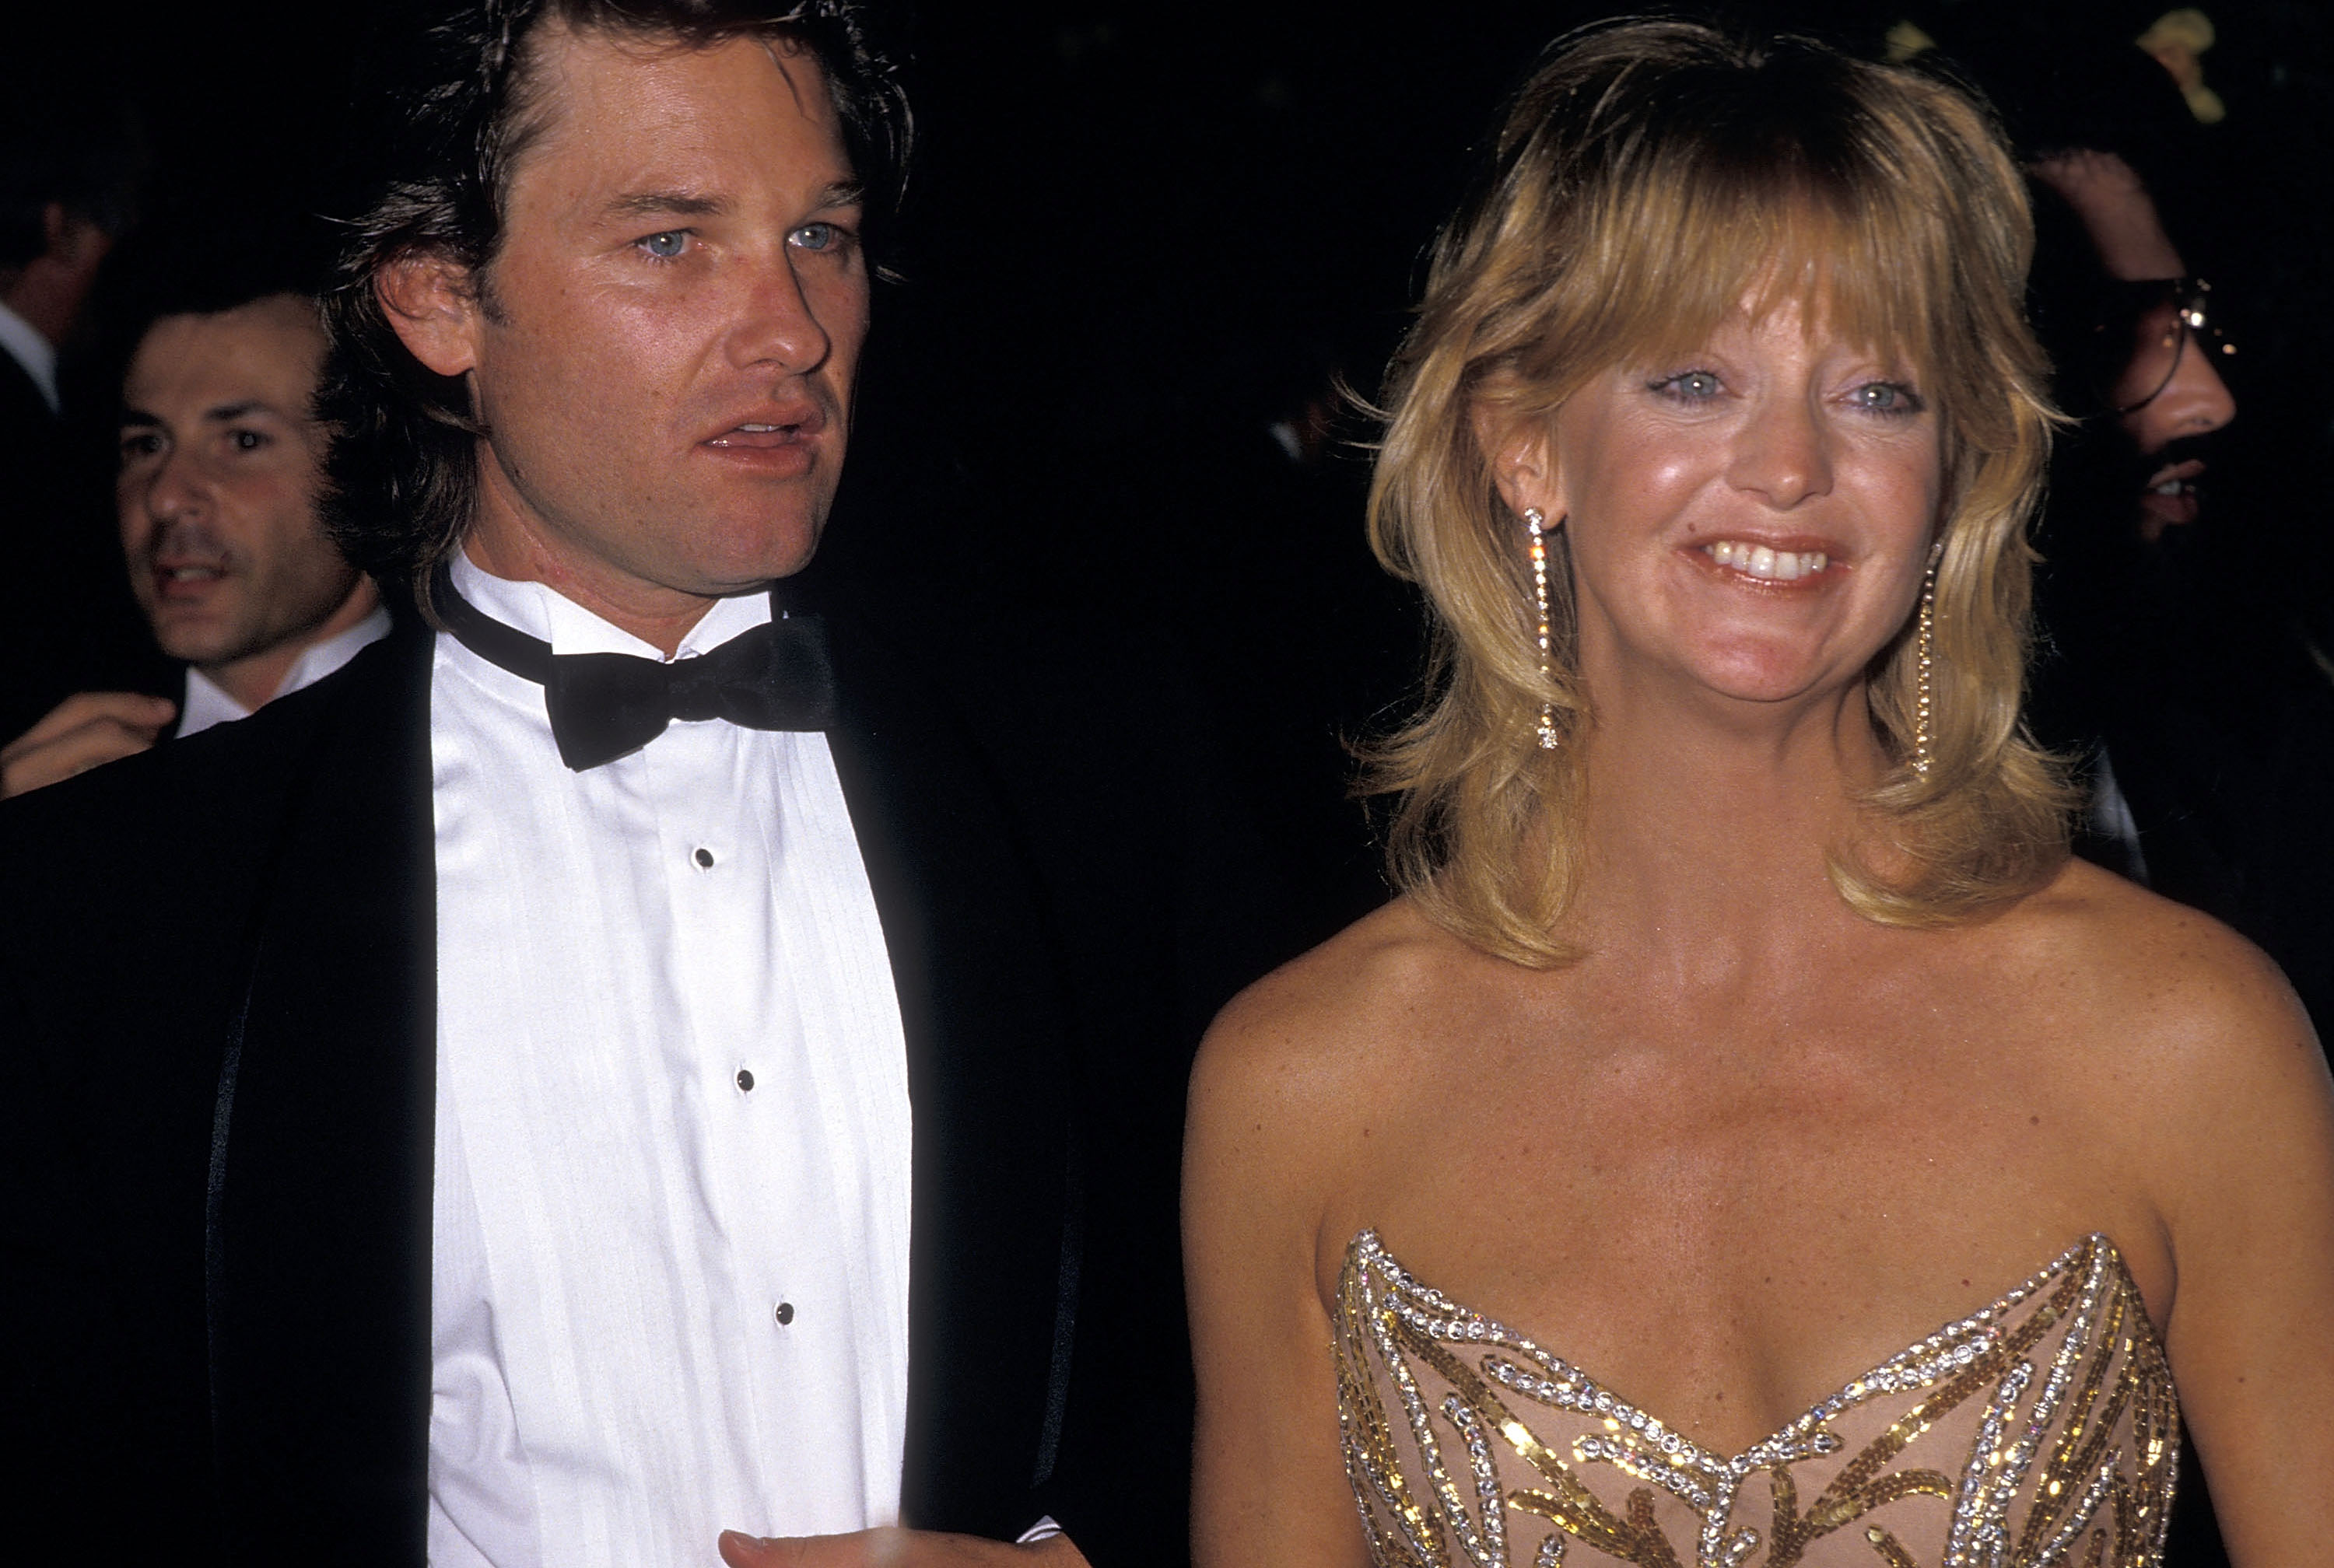 Kurt Russell and Goldie Hawn on January 27, 1987 in Los Angeles, California. | Source: Getty Images